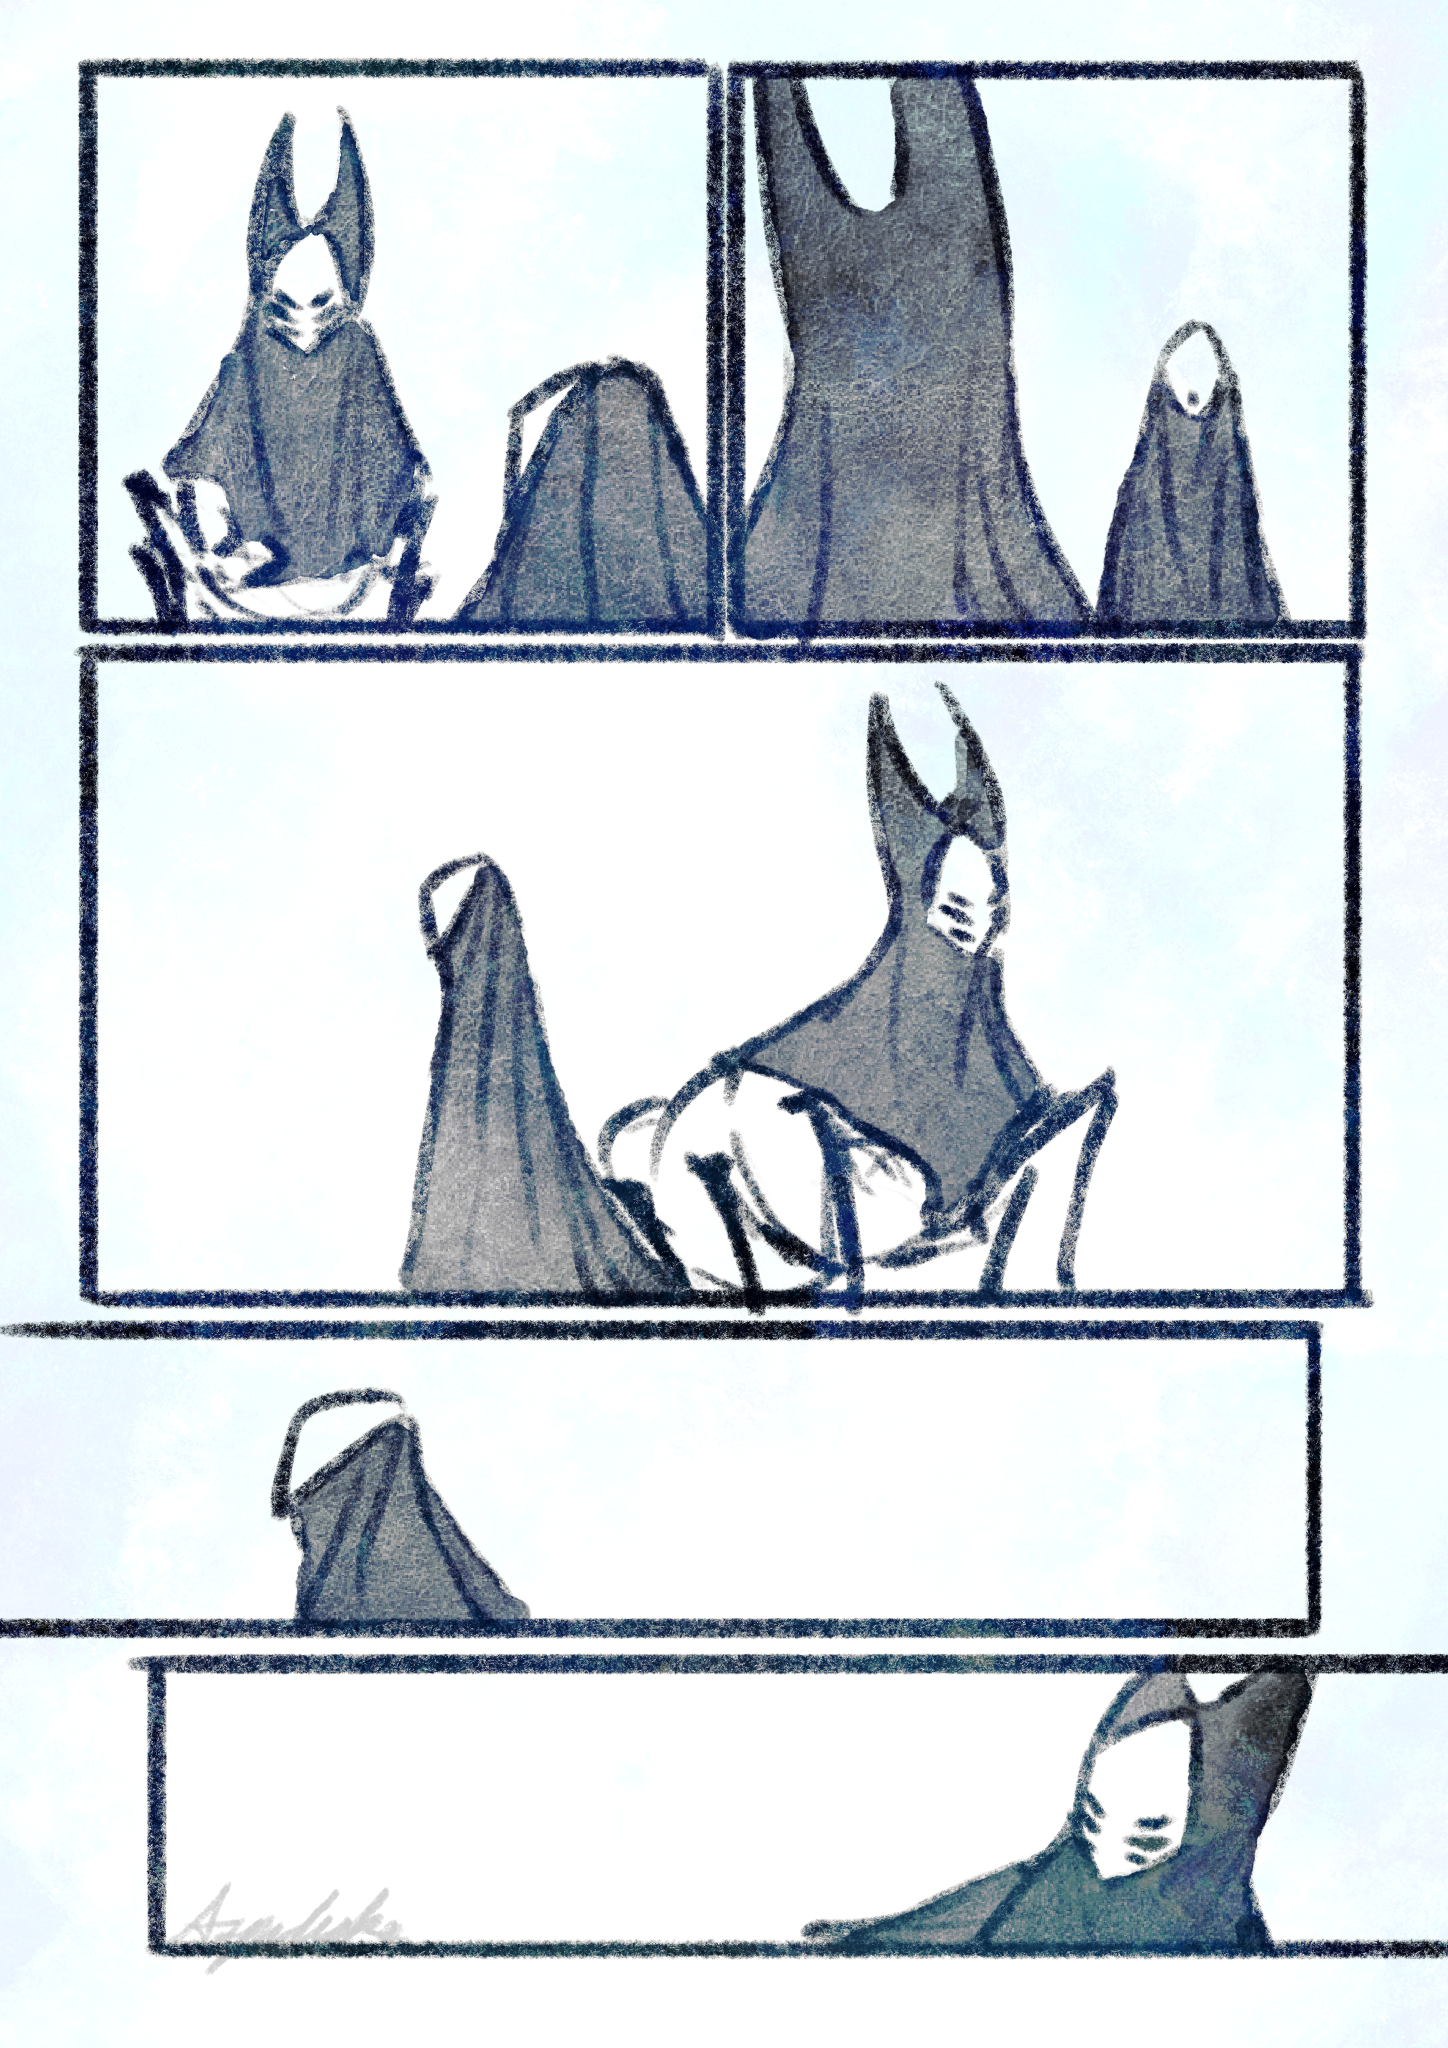 Comic page 1. Herrah and Lurien meet in a corridor. Lurien passes by Herrah without a word as she stares after him.